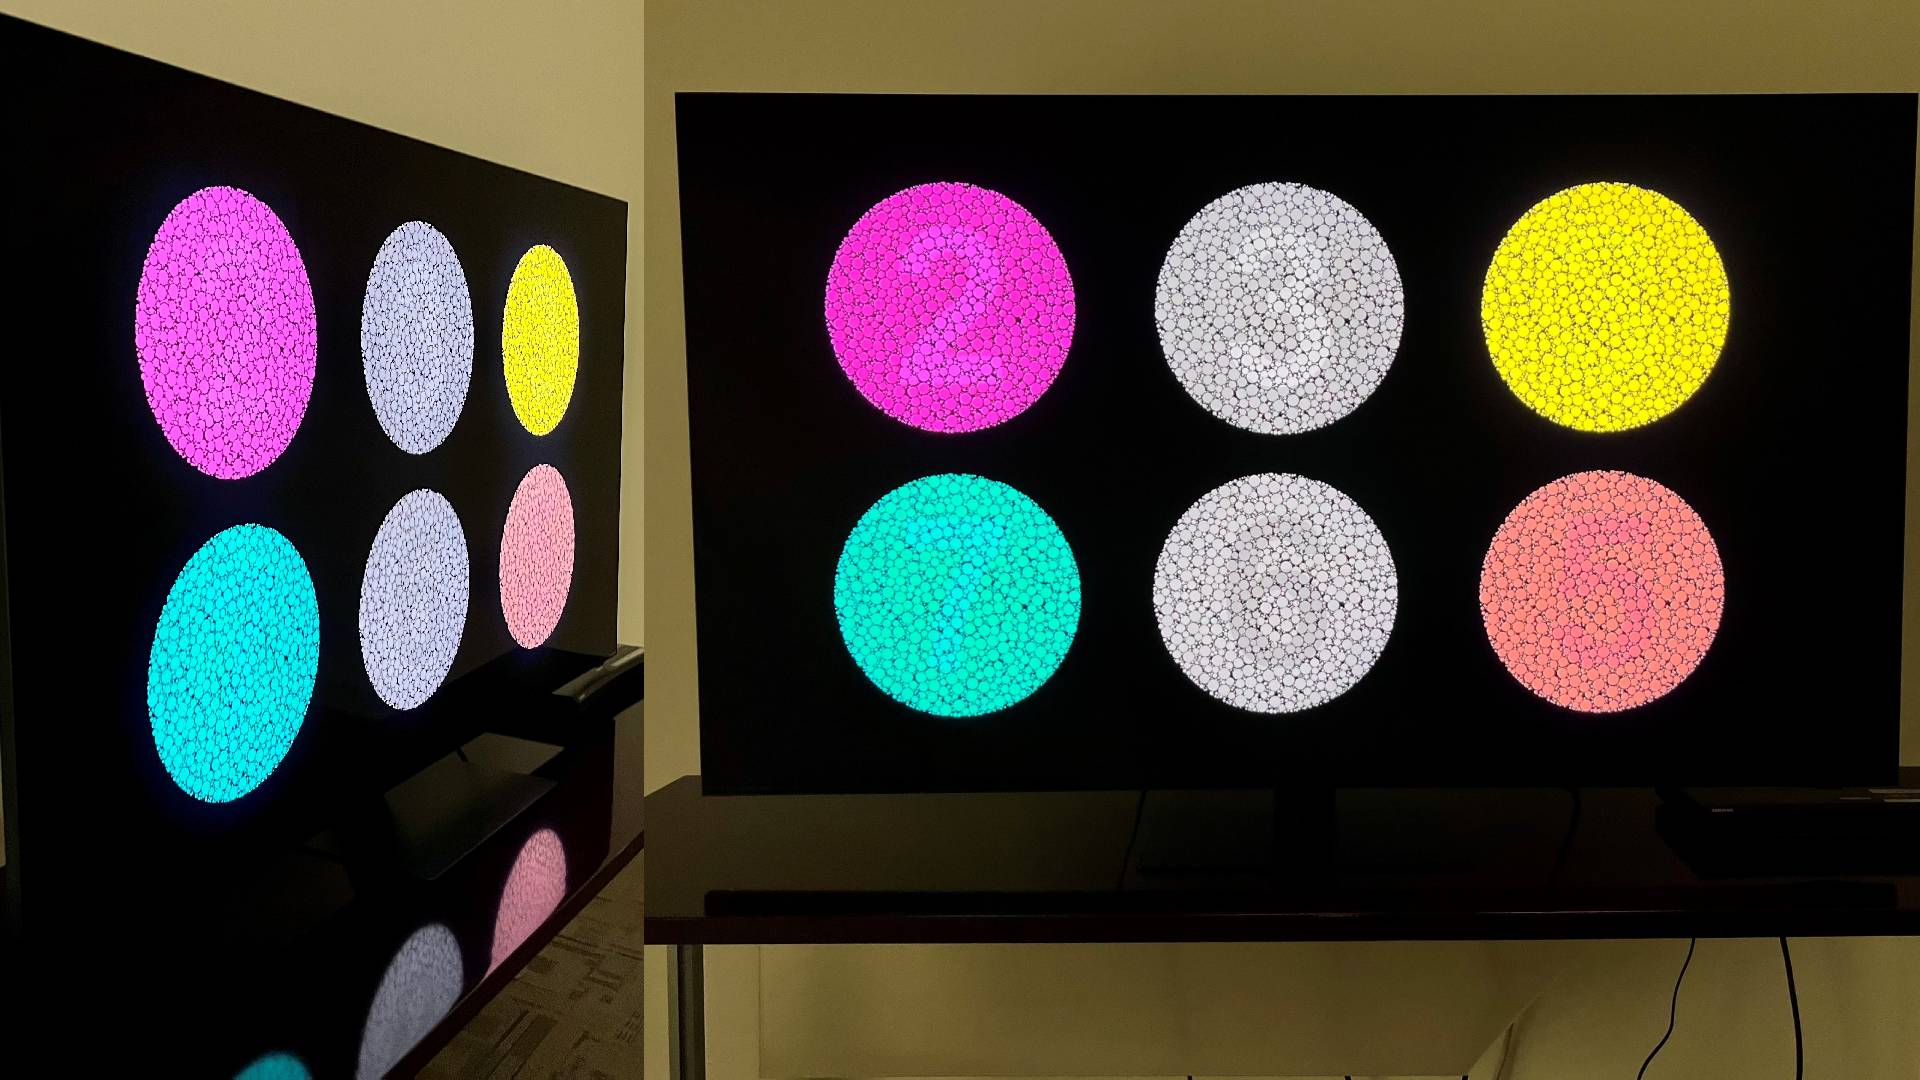 Samsung-QN95C TV split screen showing test pattern at center and off-axis